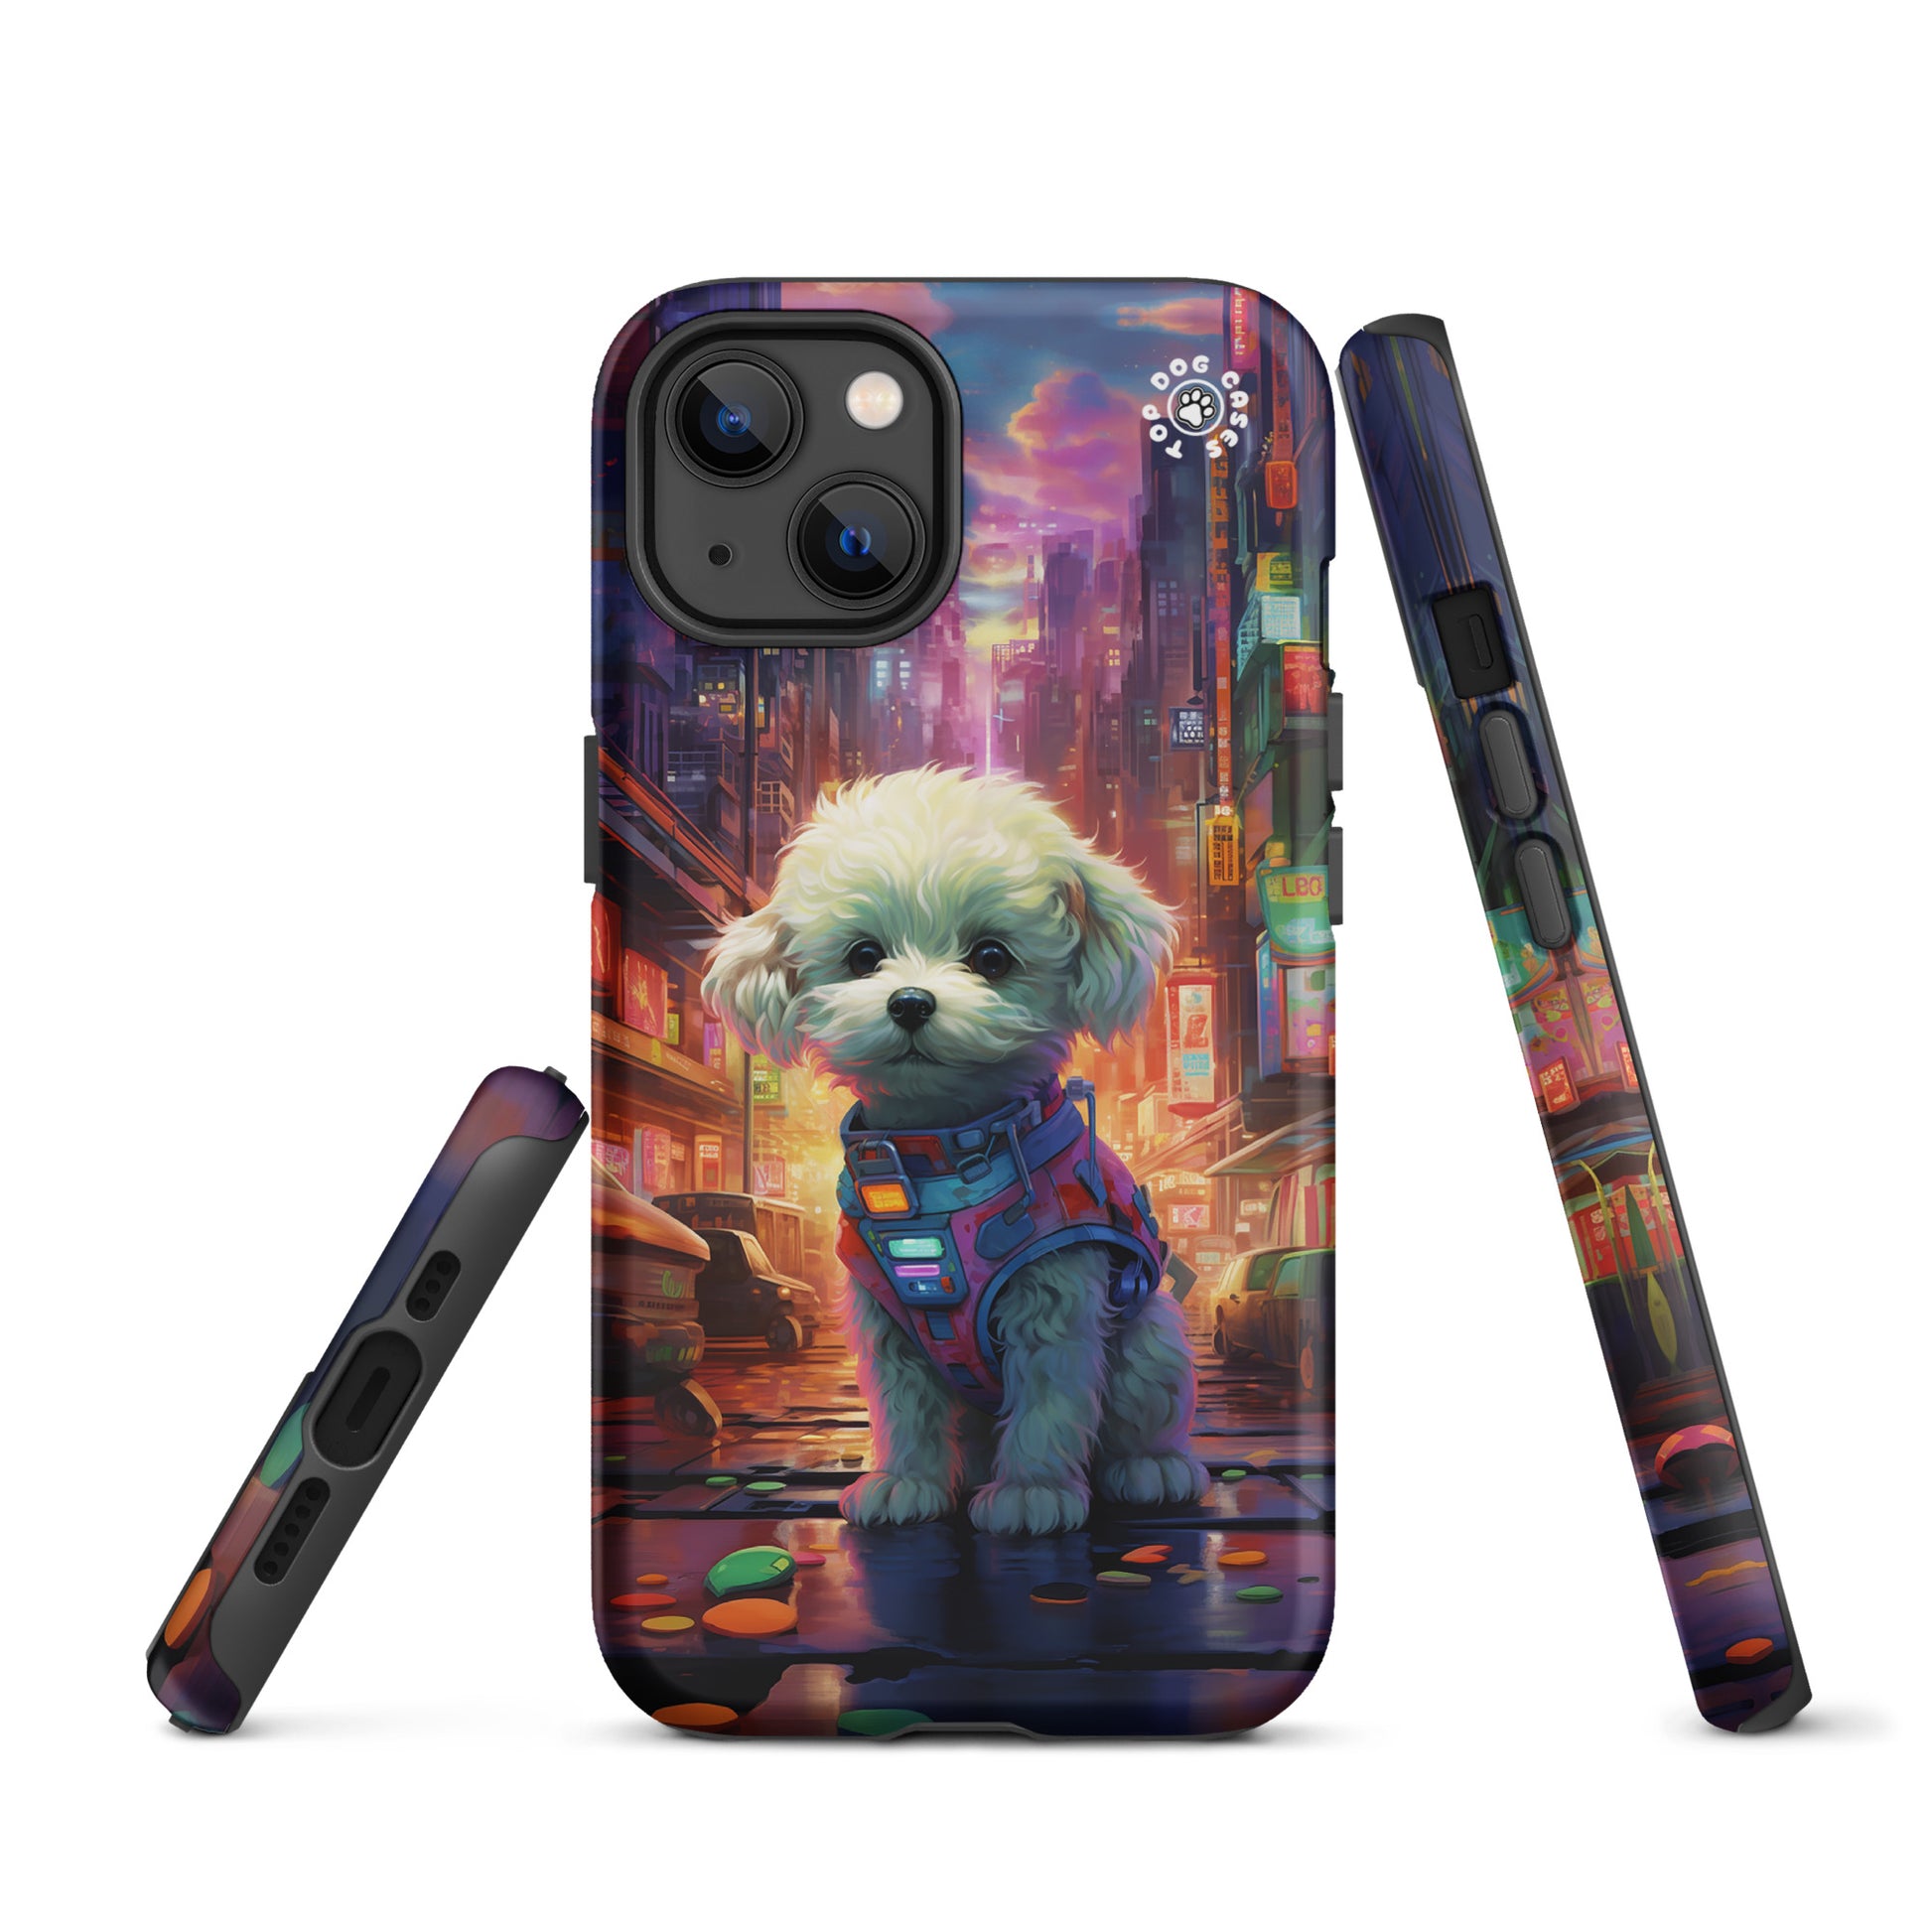 Toy Poodle in the City - iPhone 13 Case - Cute Phone Cases - Top Dog Cases - #CityDog, #CityDogs, #CuteDog, #CuteDogs, #CutePhoneCases, #DogPhoneCase, #dogs, #iPhone13, #iPhone13case, #iPhone13DogCase, #iPhone13Mini, #iPhone13Pro, #iPhone13ProMax, #iPhonecase, #iphonedogcase, #ToughCase, #ToyPoodle, #ToyPoodleCase